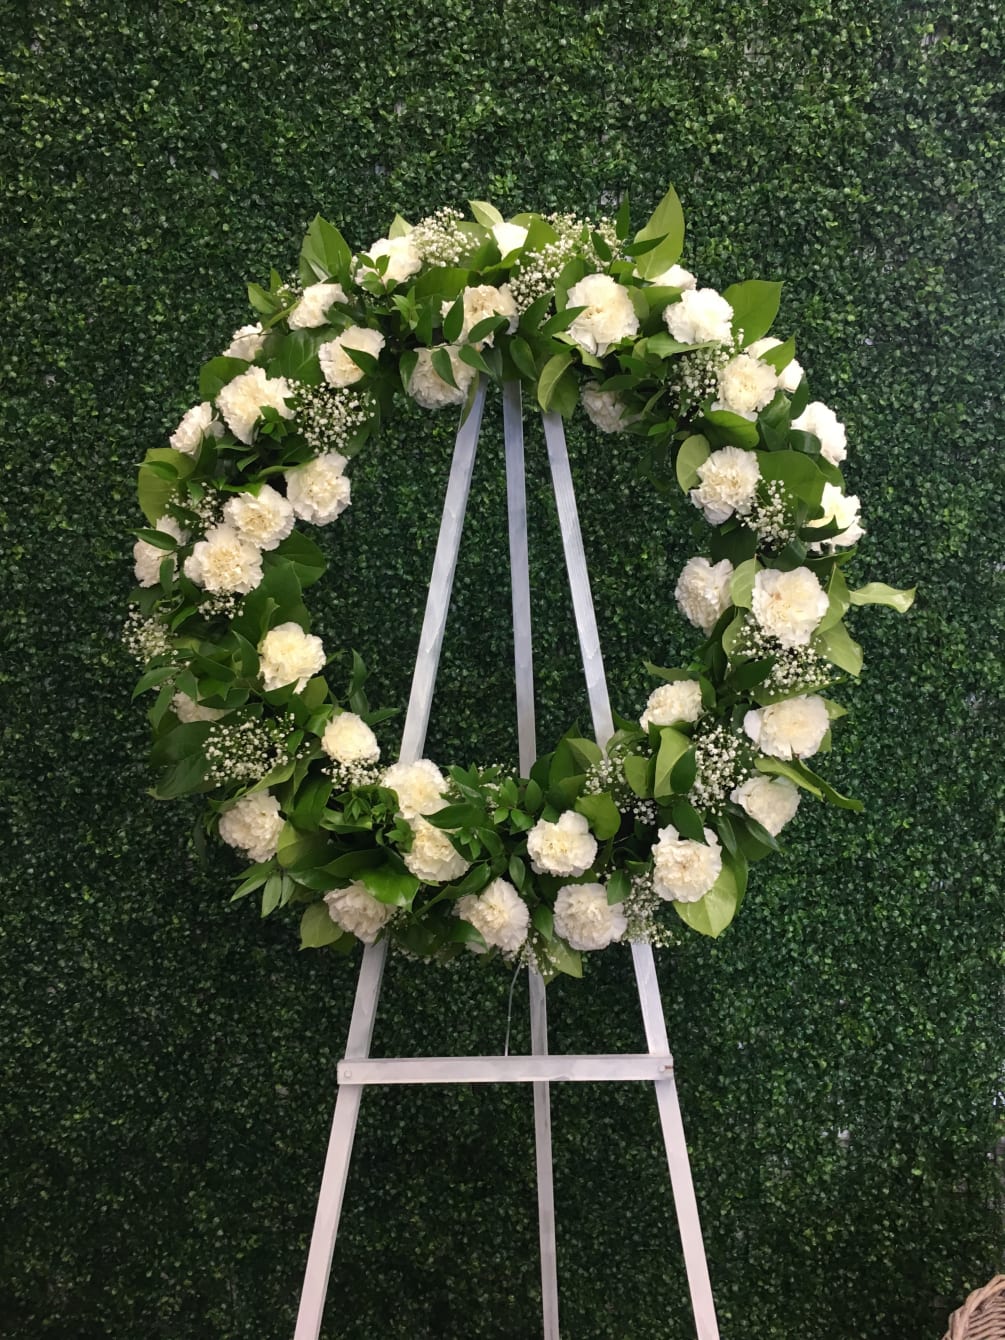 Stunning and quaint floral wreath designed with seasonal white flowers and greens.